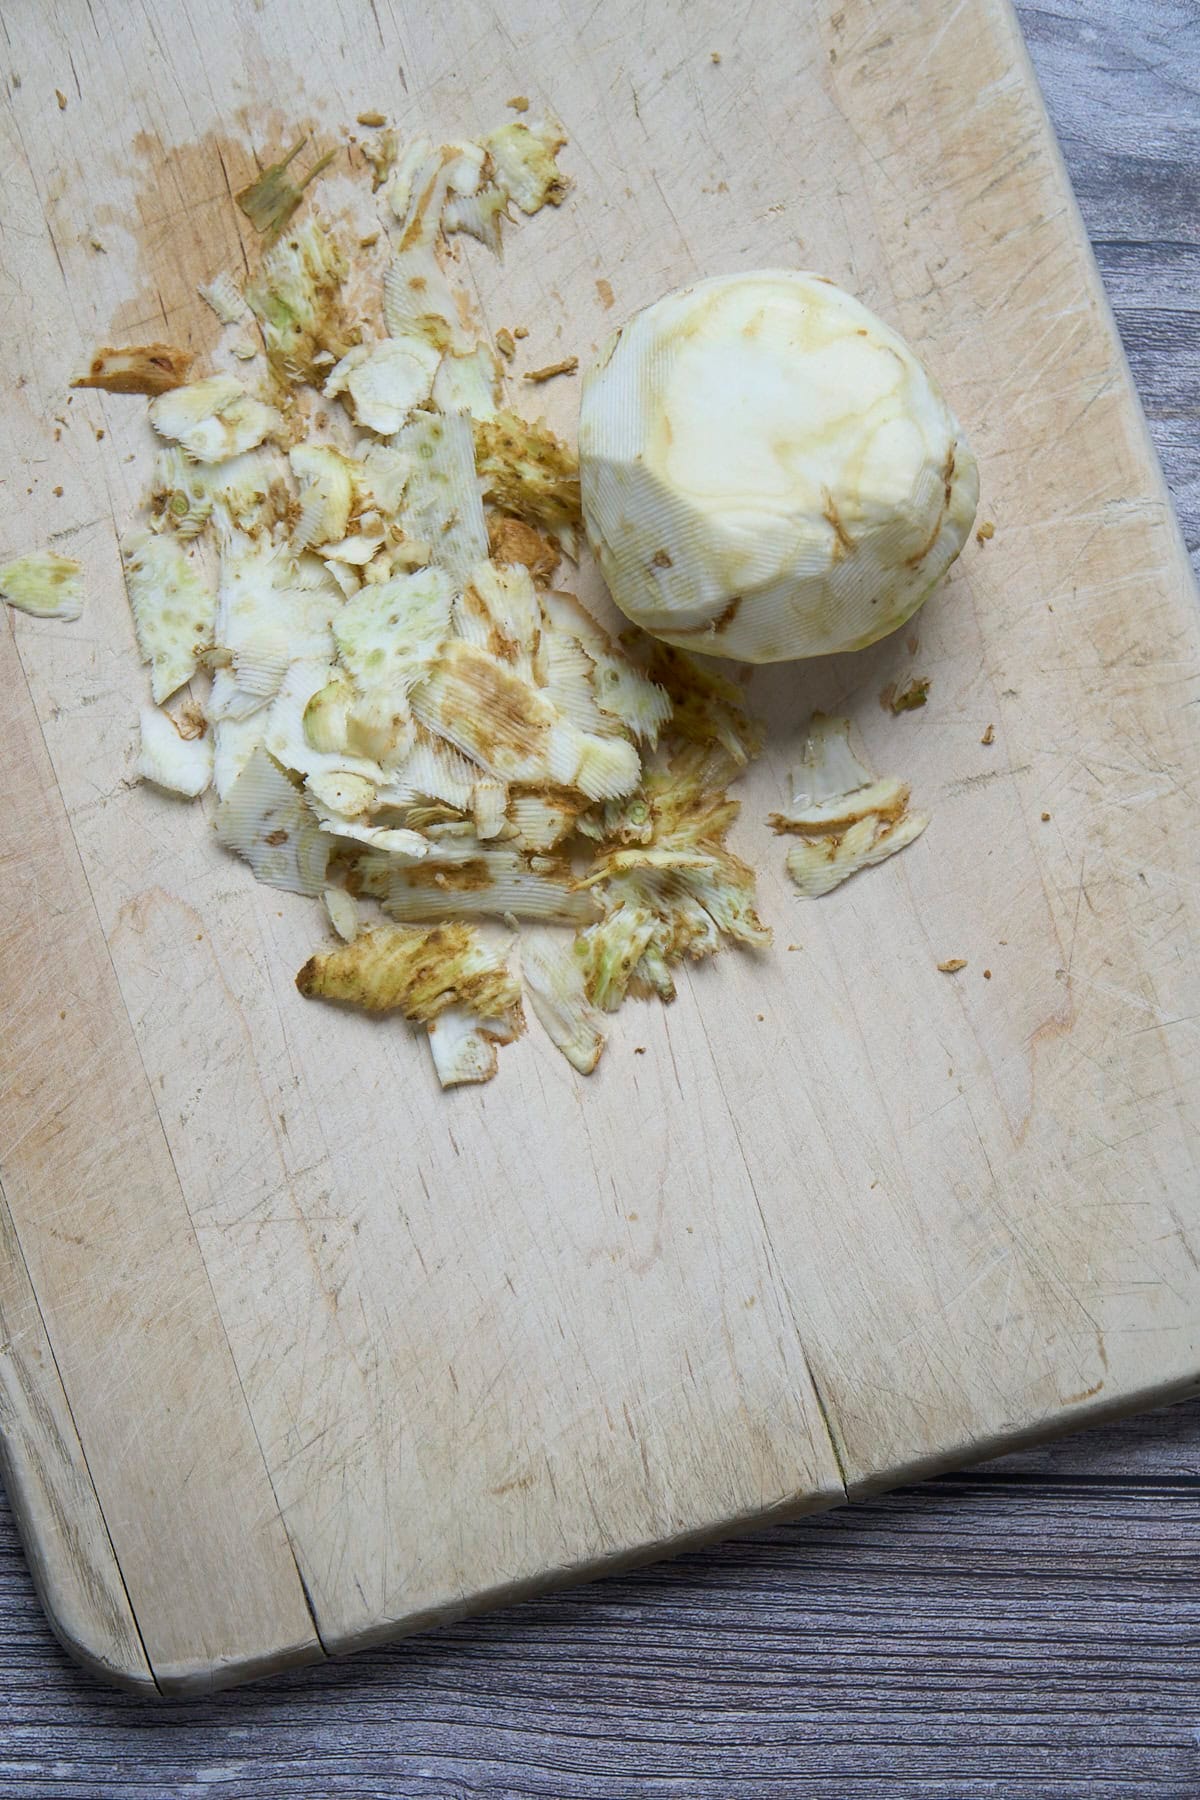 cleaning a celery root